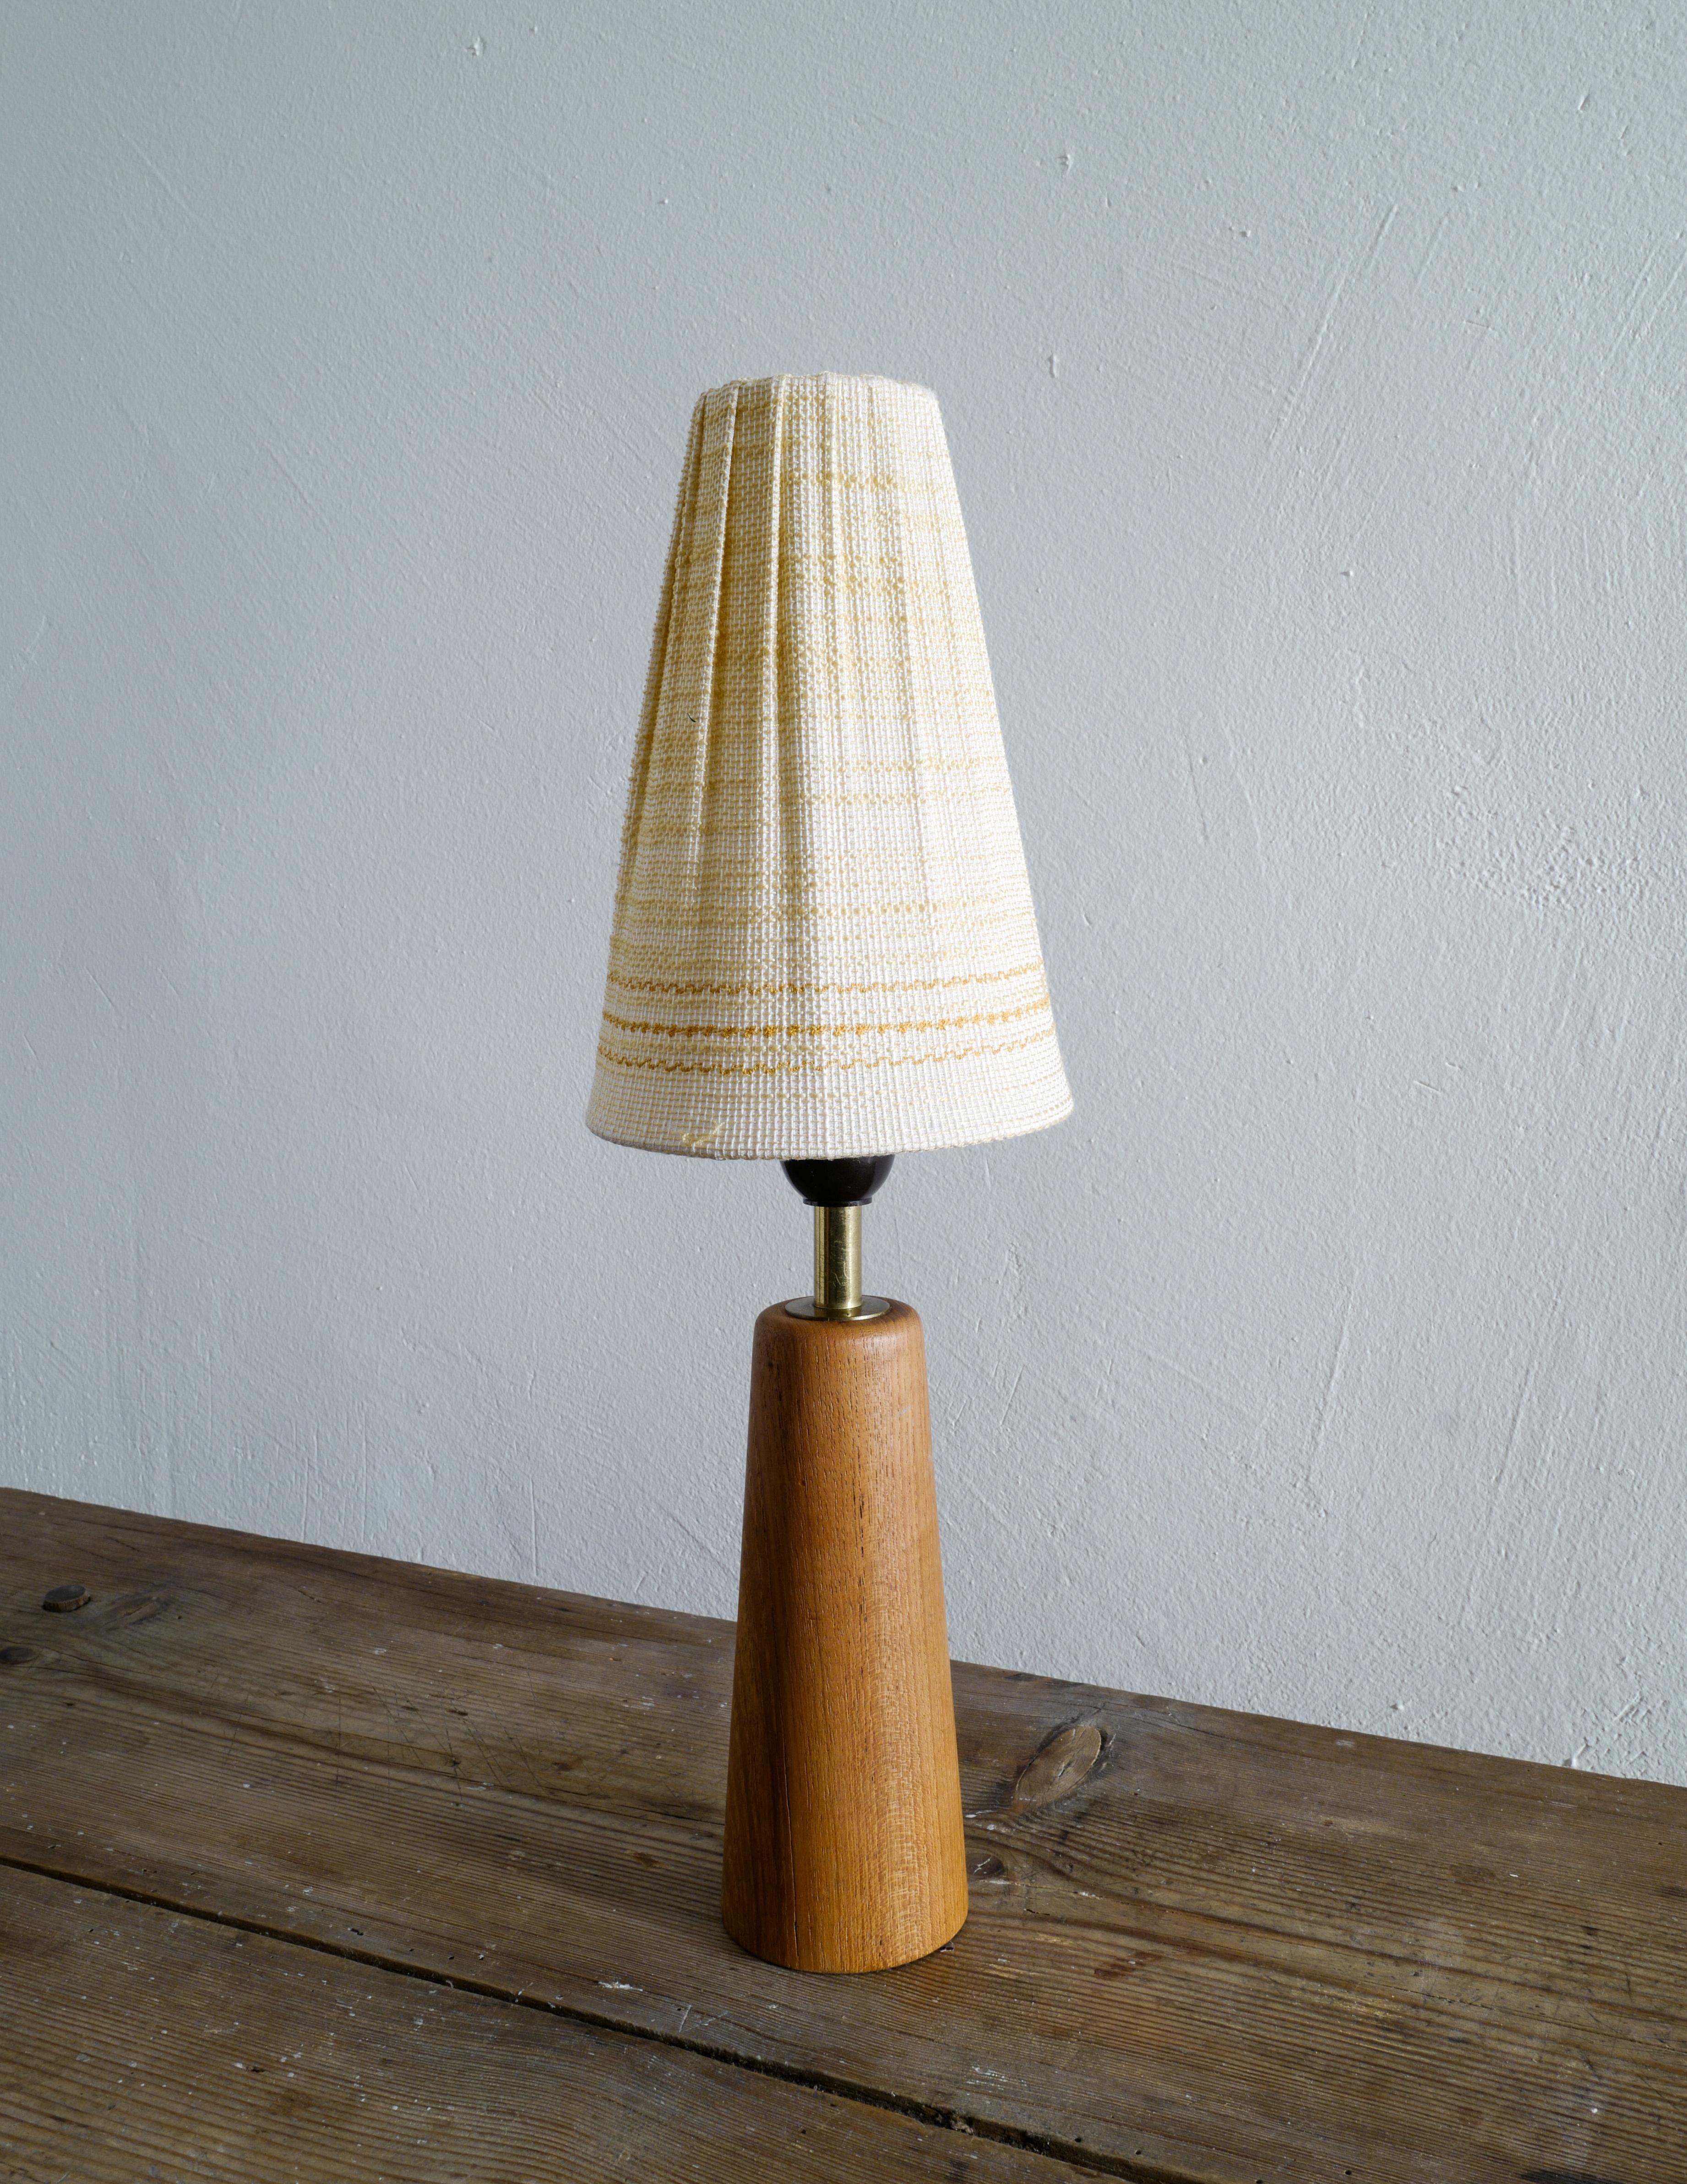 Rare table lamp in stained teak and brass designed by Lisa Johansson-Pape produced in Finland ca 1950s. In good vintage condition with minimal signs of use. Shade is included in the purchase. Dimensions: 45 x 14 cm with the shade and 28, 5 x 7 cm